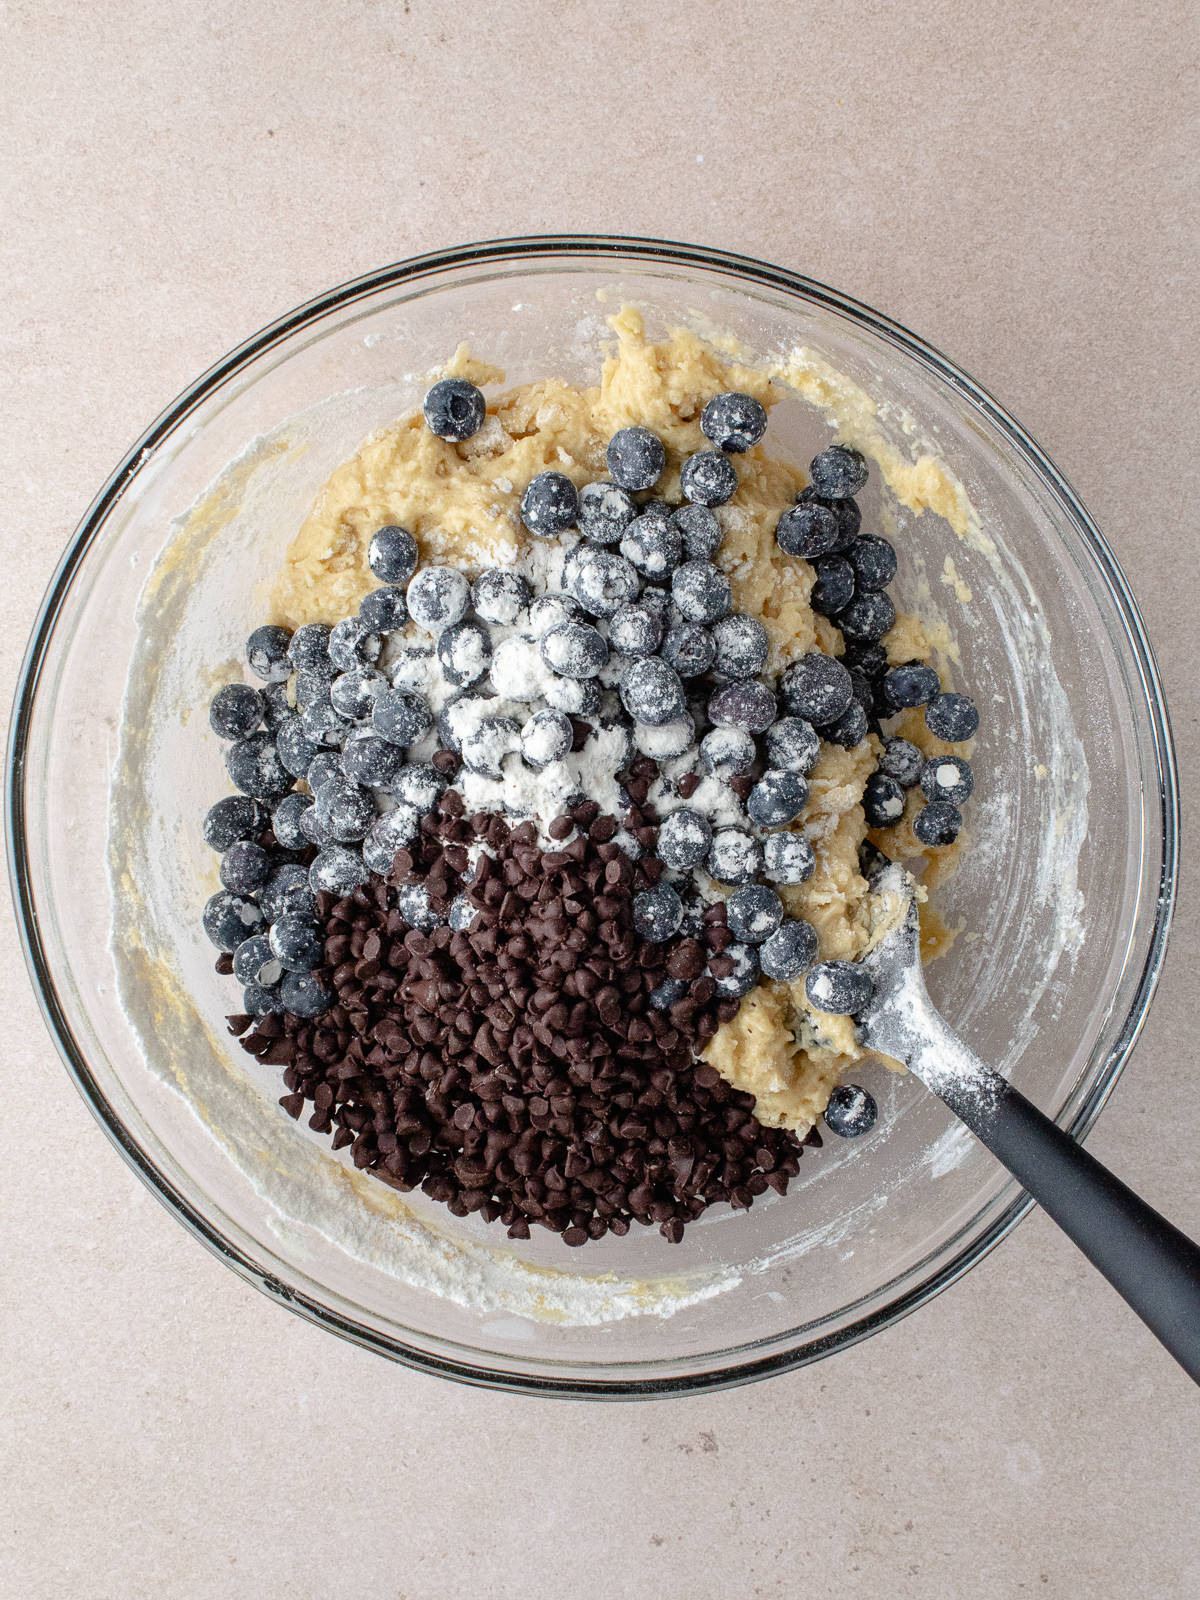 Flour Coated blueberries and mini chocolate chips are added to batter.